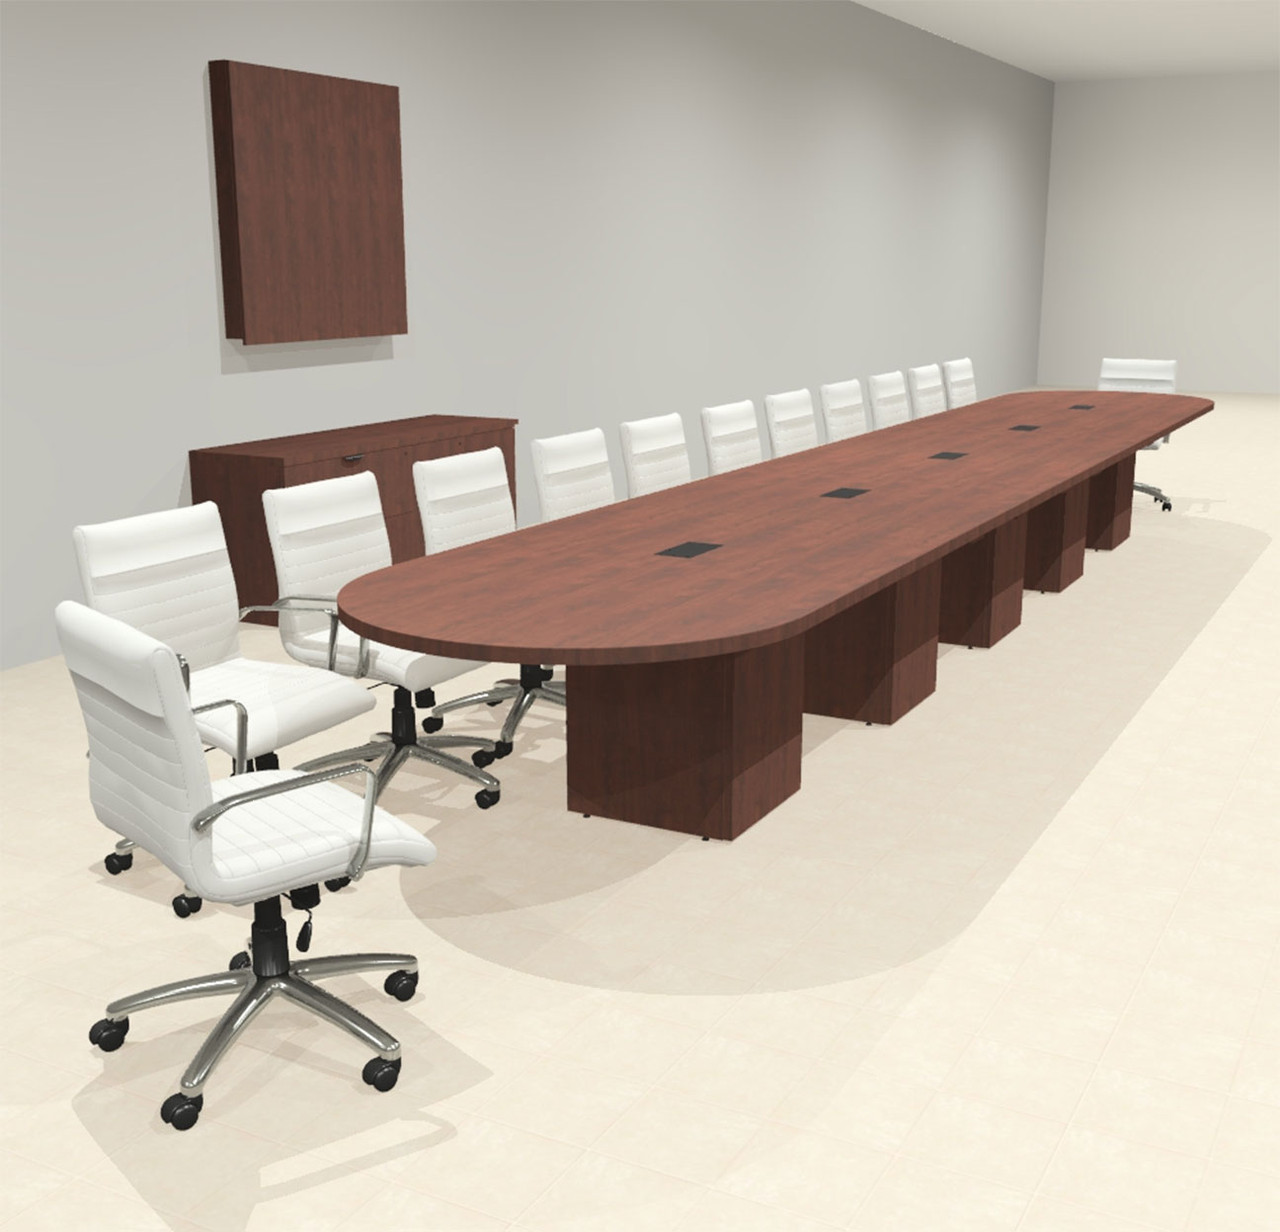 Modern Racetrack 24' Feet Conference Table, #OF-CON-CRQ61